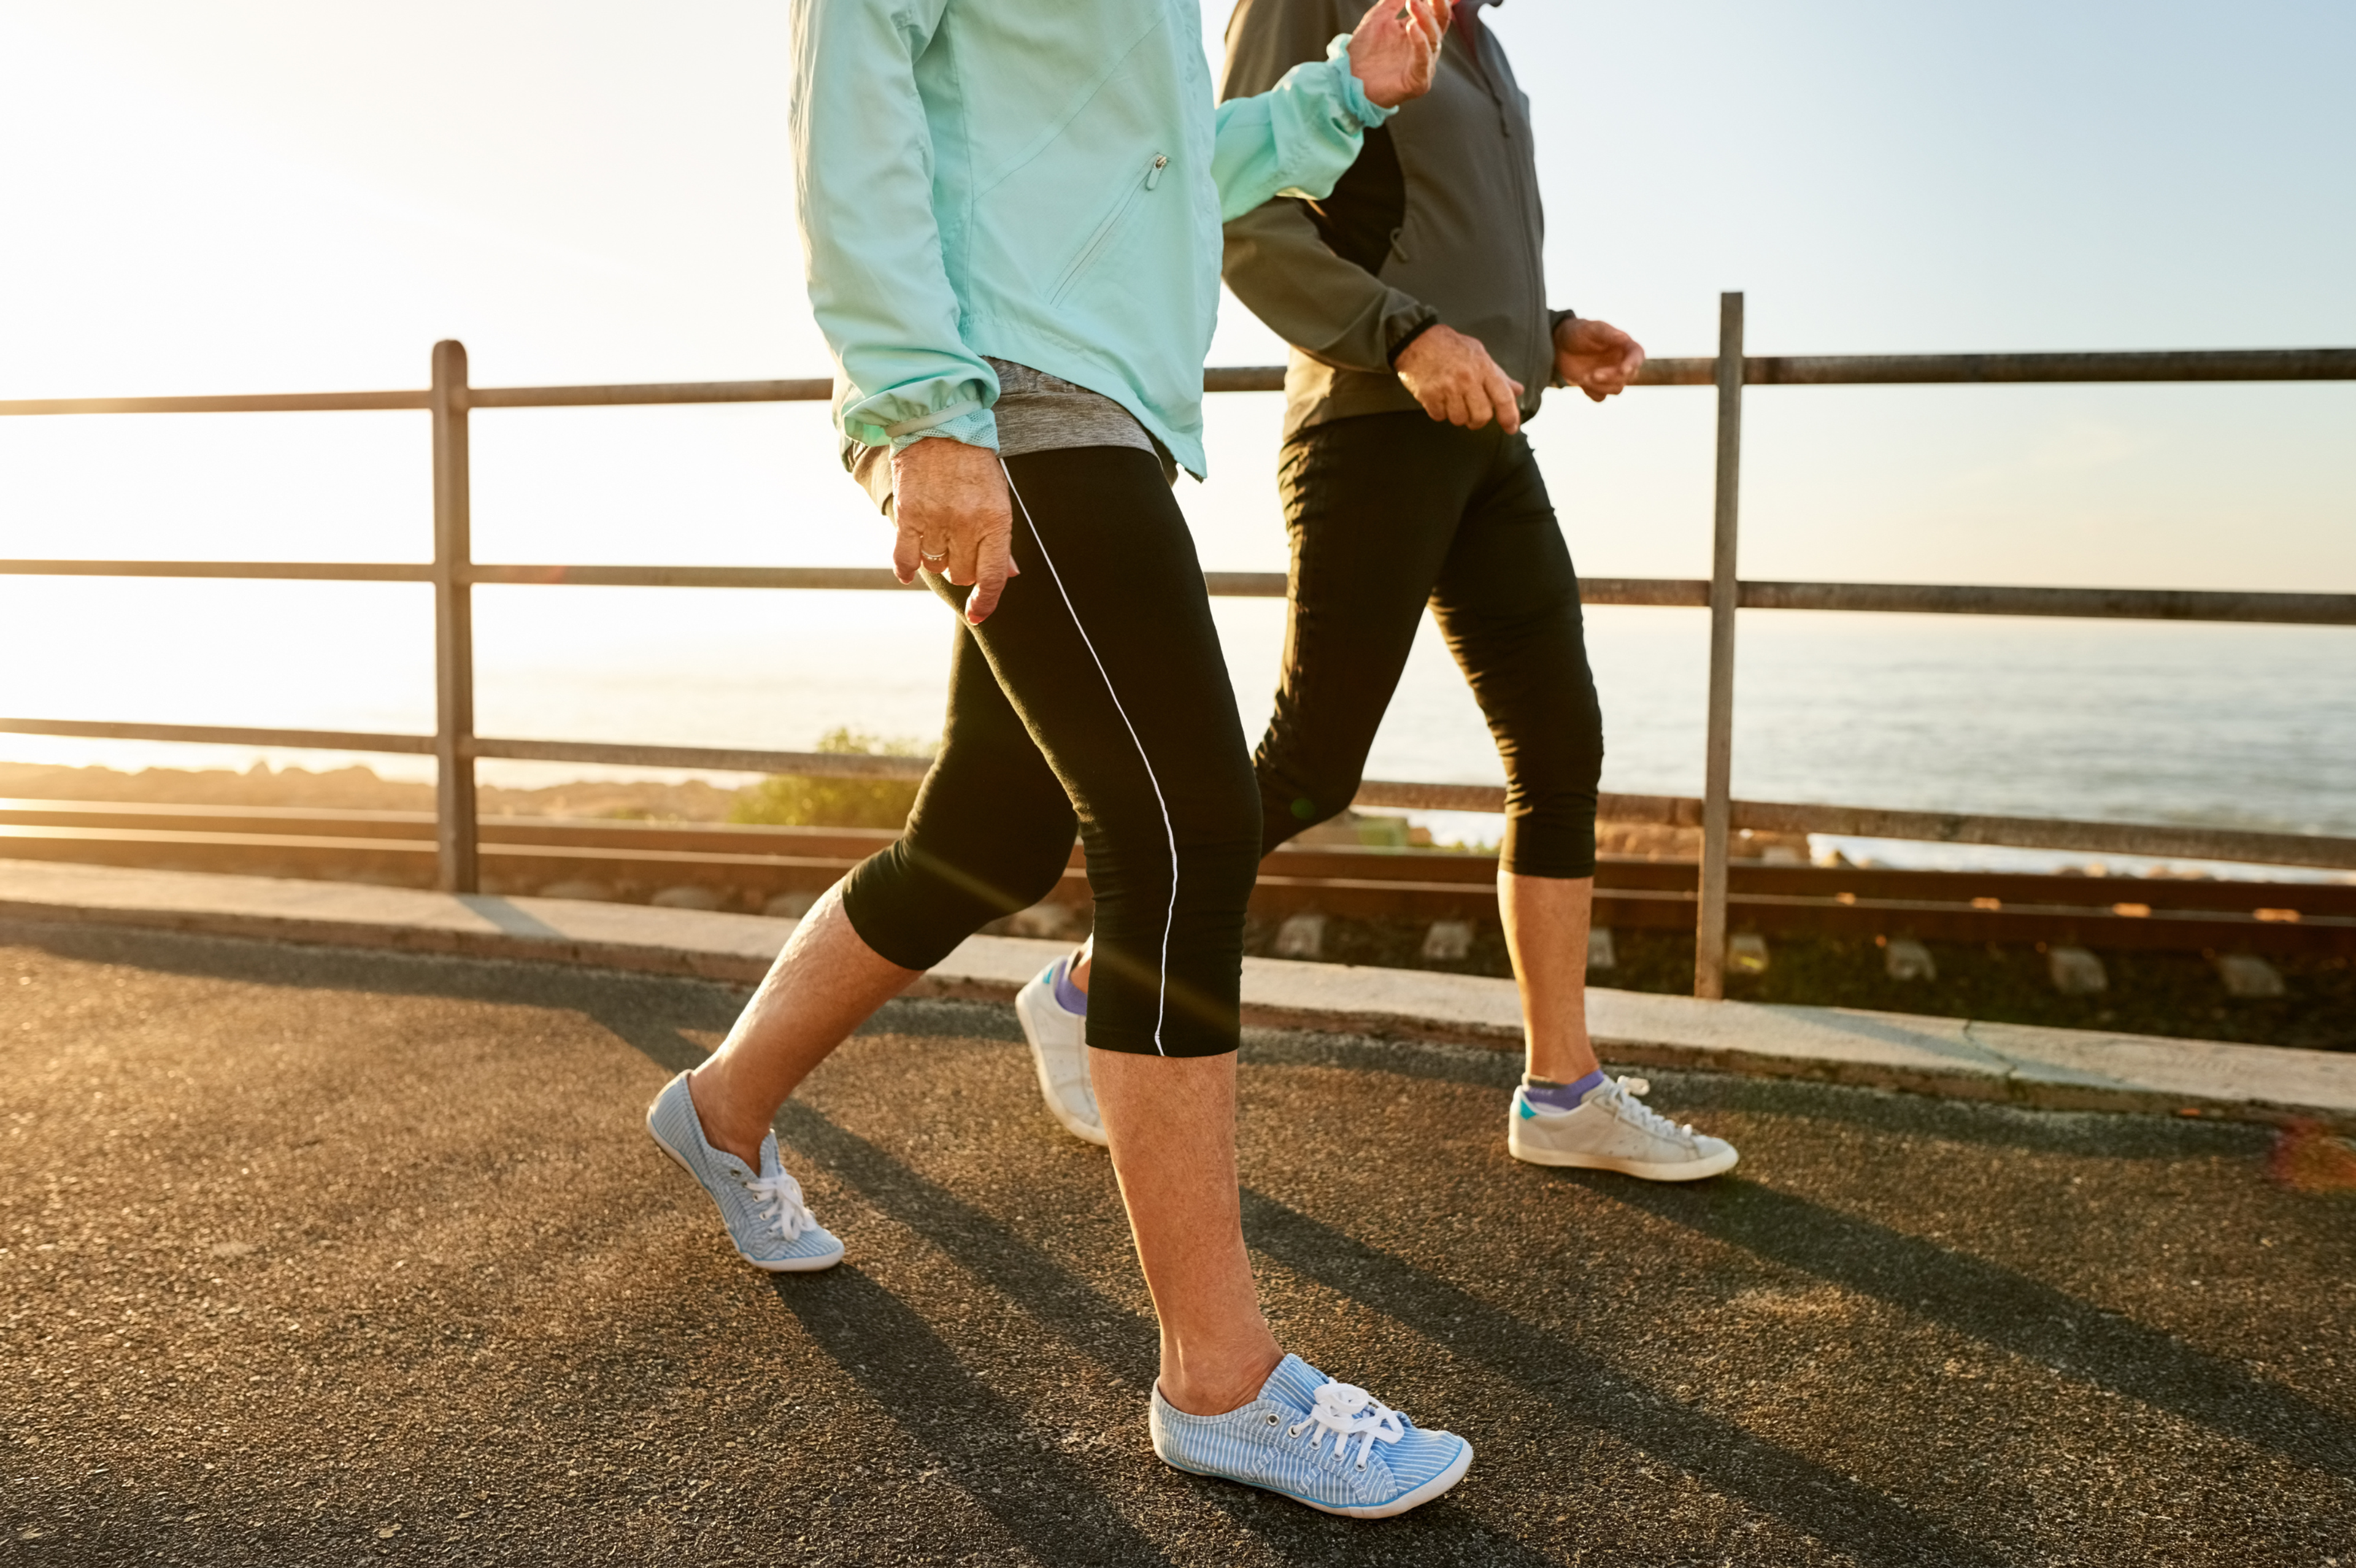 Walking can help prepare your gluteal tendons for getting back to running.